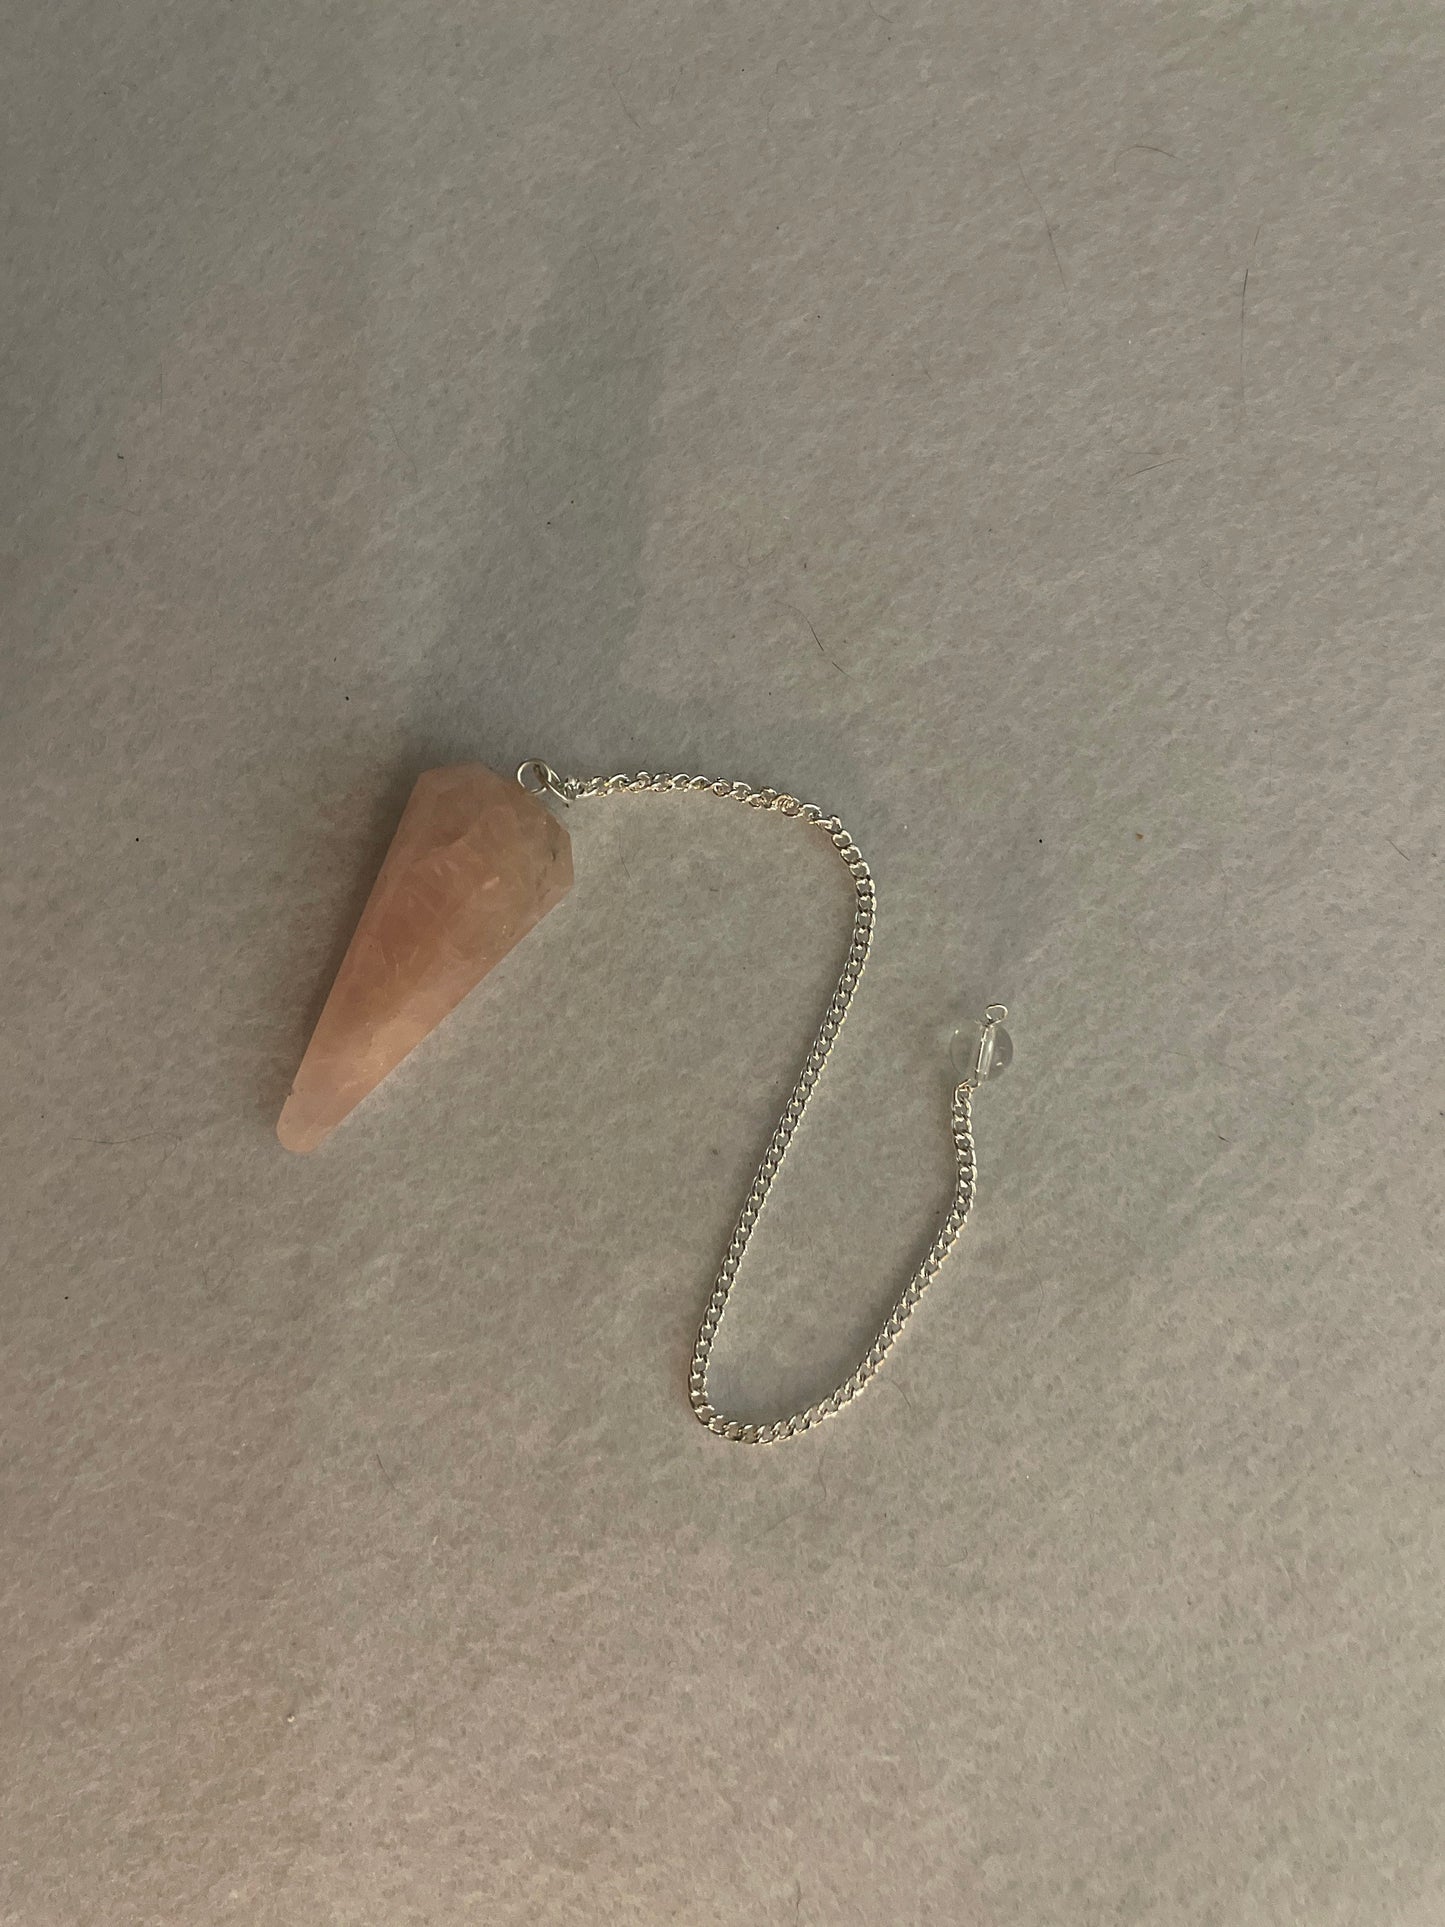 This beautiful Rose Quartz Pendulum is  1.75” and with chain is 8”.